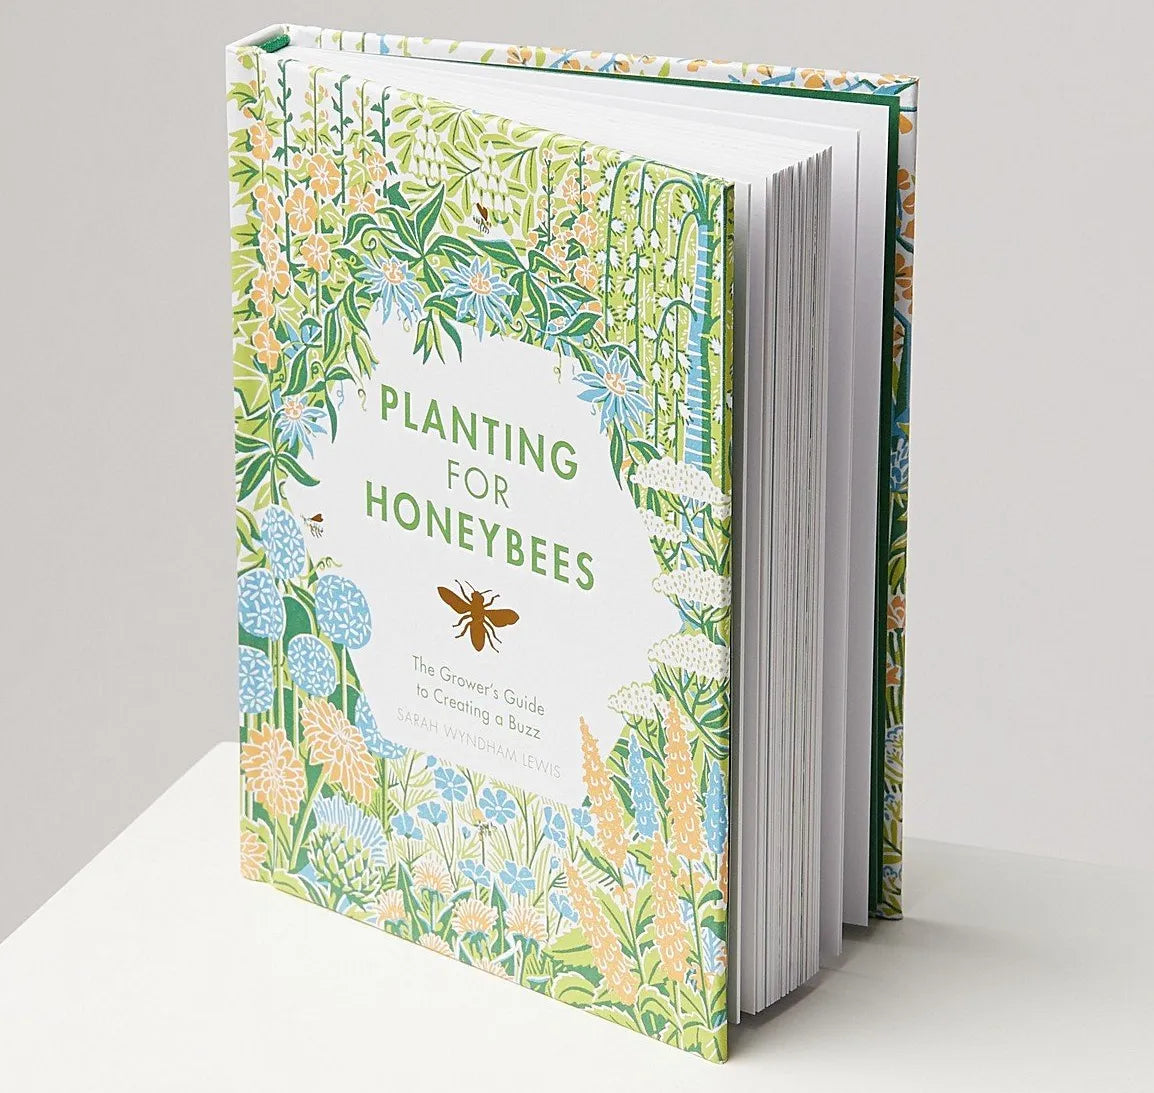 Planting for Honeybees book by Sarah Wyndham